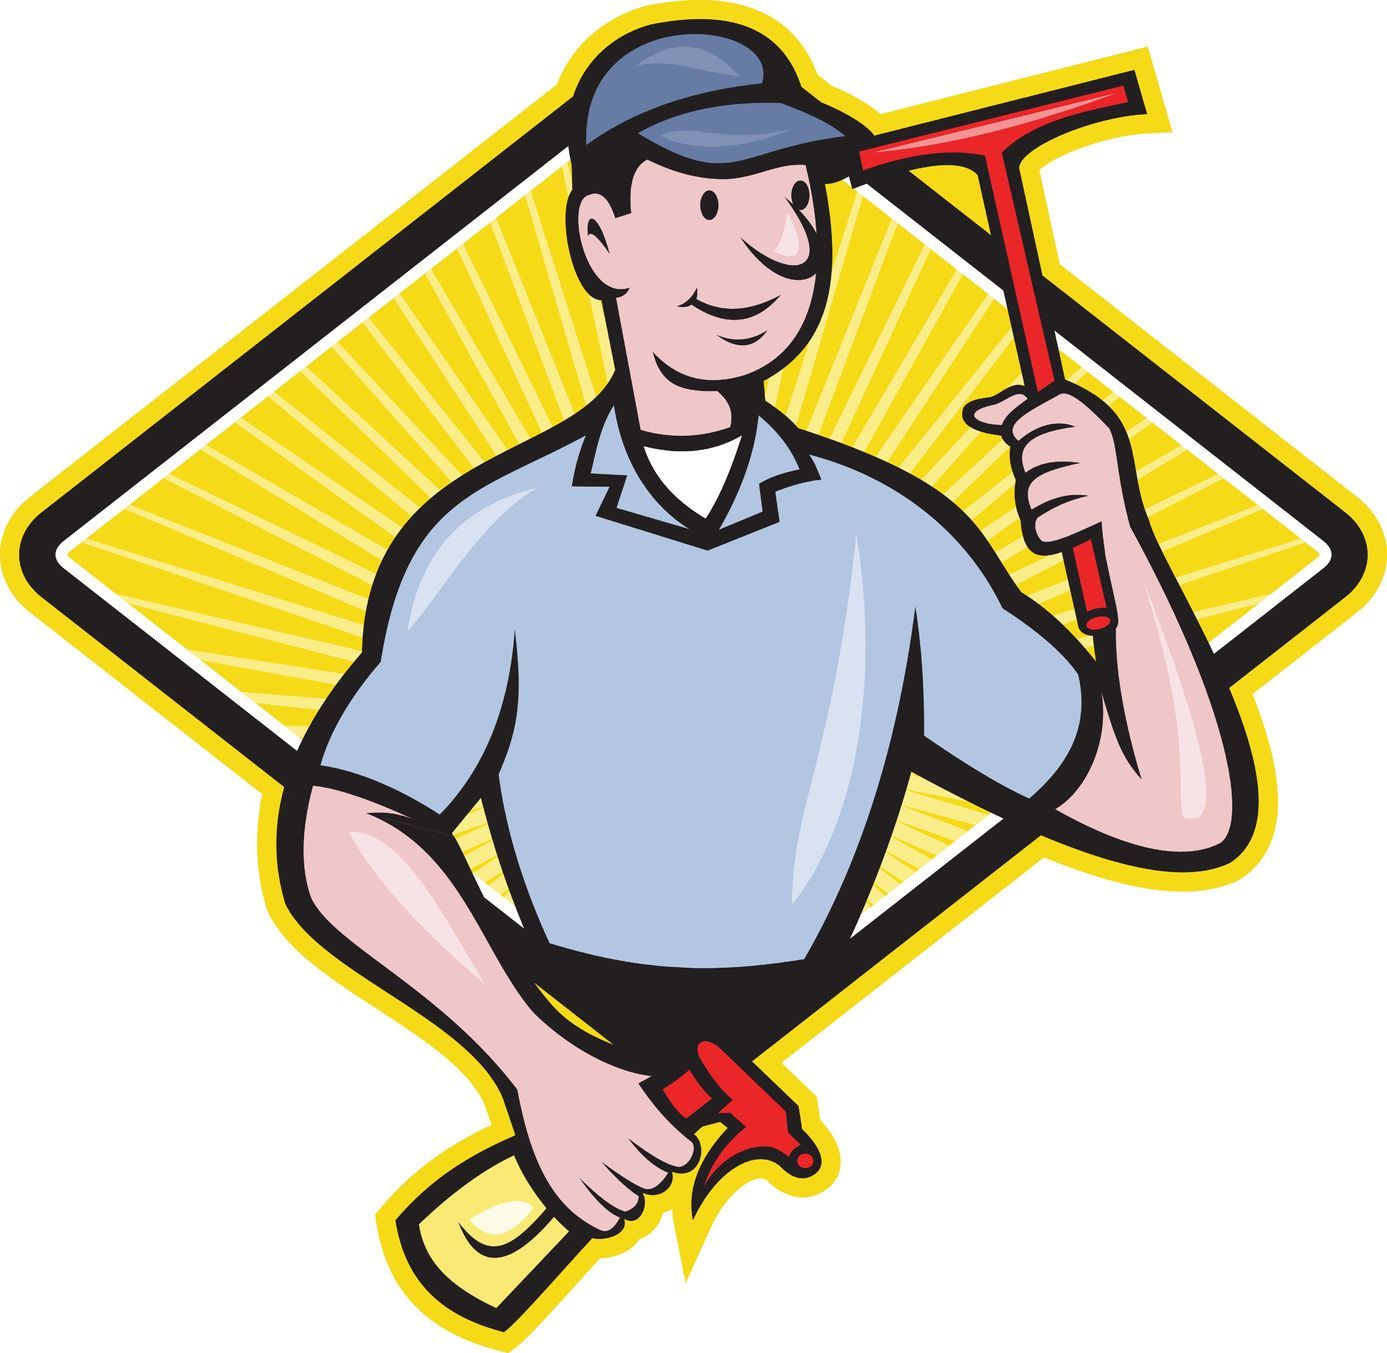 Clipart cleaning service 7 » Clipart Portal.